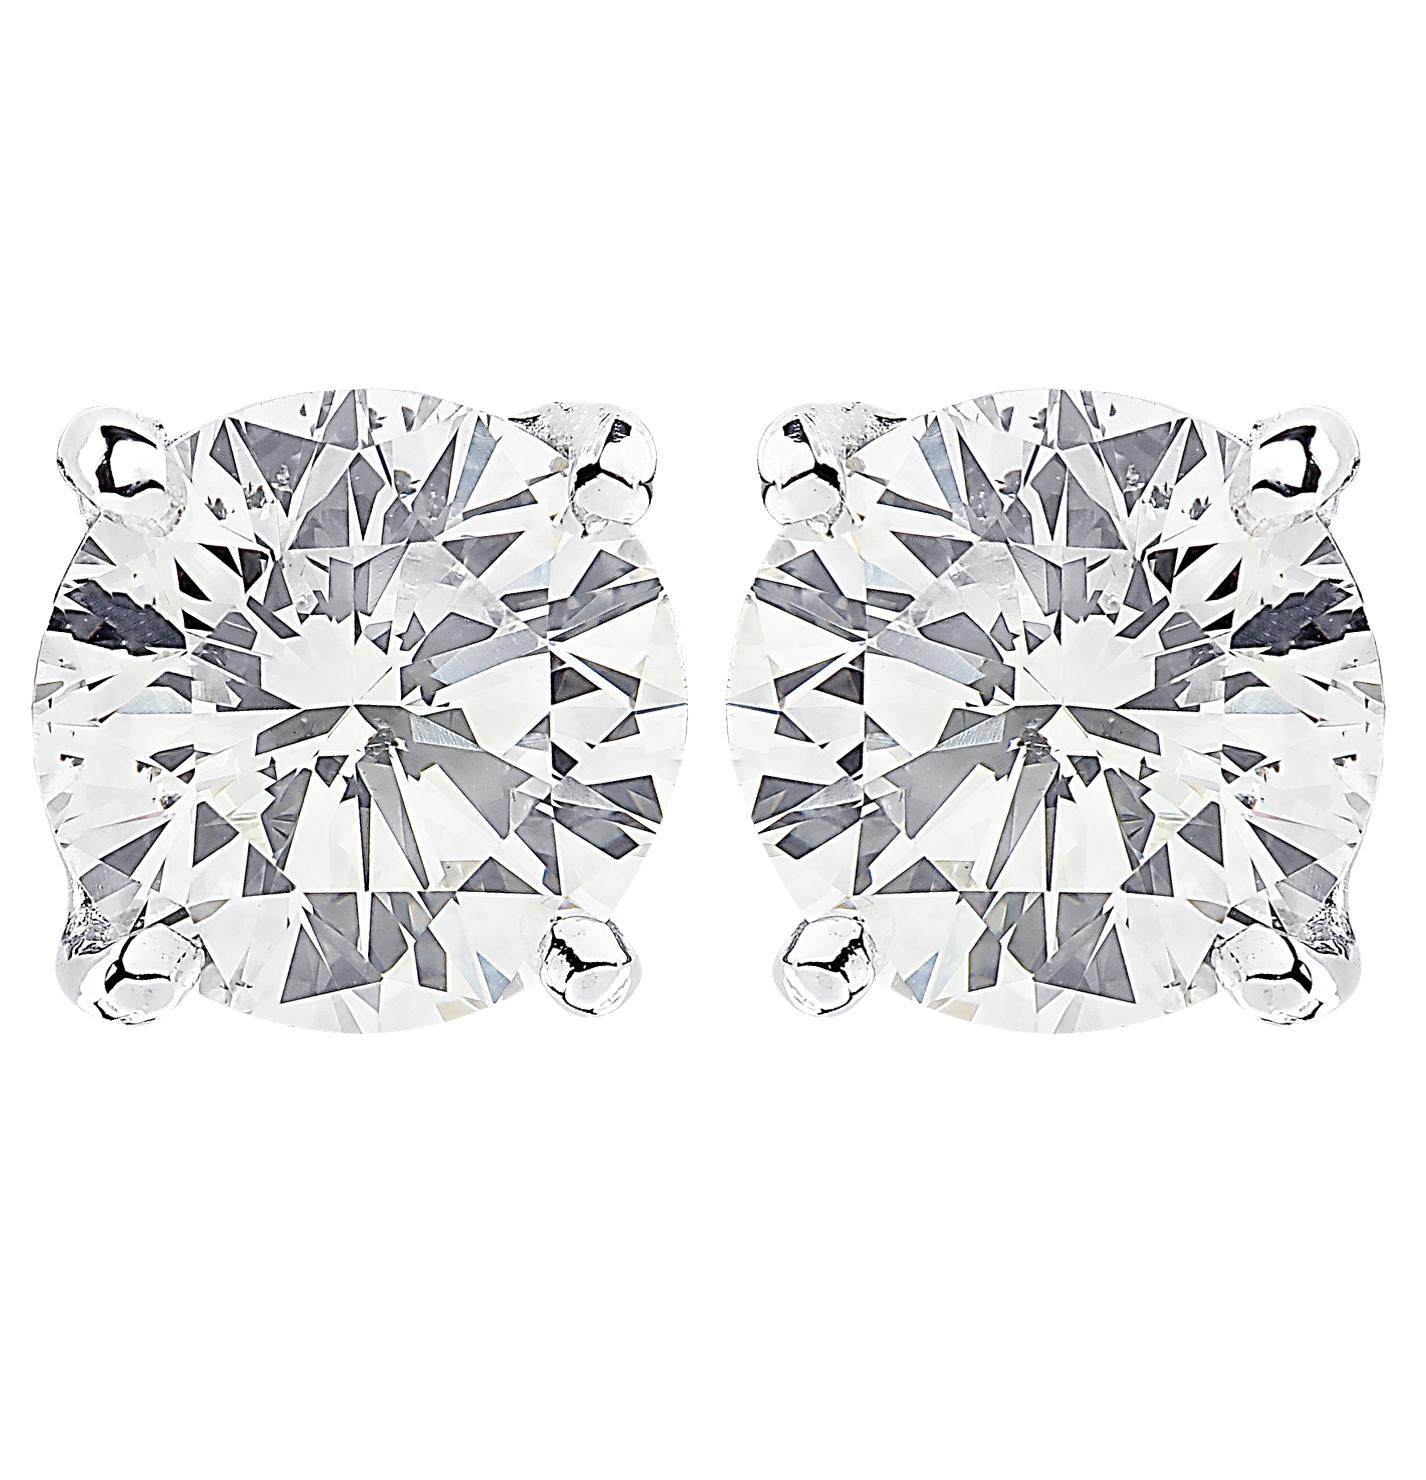 Stunning Vivid Diamonds solitaire stud earrings crafted in 18 karat white gold, showcasing 2 spectacular GIA Certified round brilliant cut diamonds weighing 2.06 carats total, L color SI1 clarity. These diamonds were carefully selected and perfectly